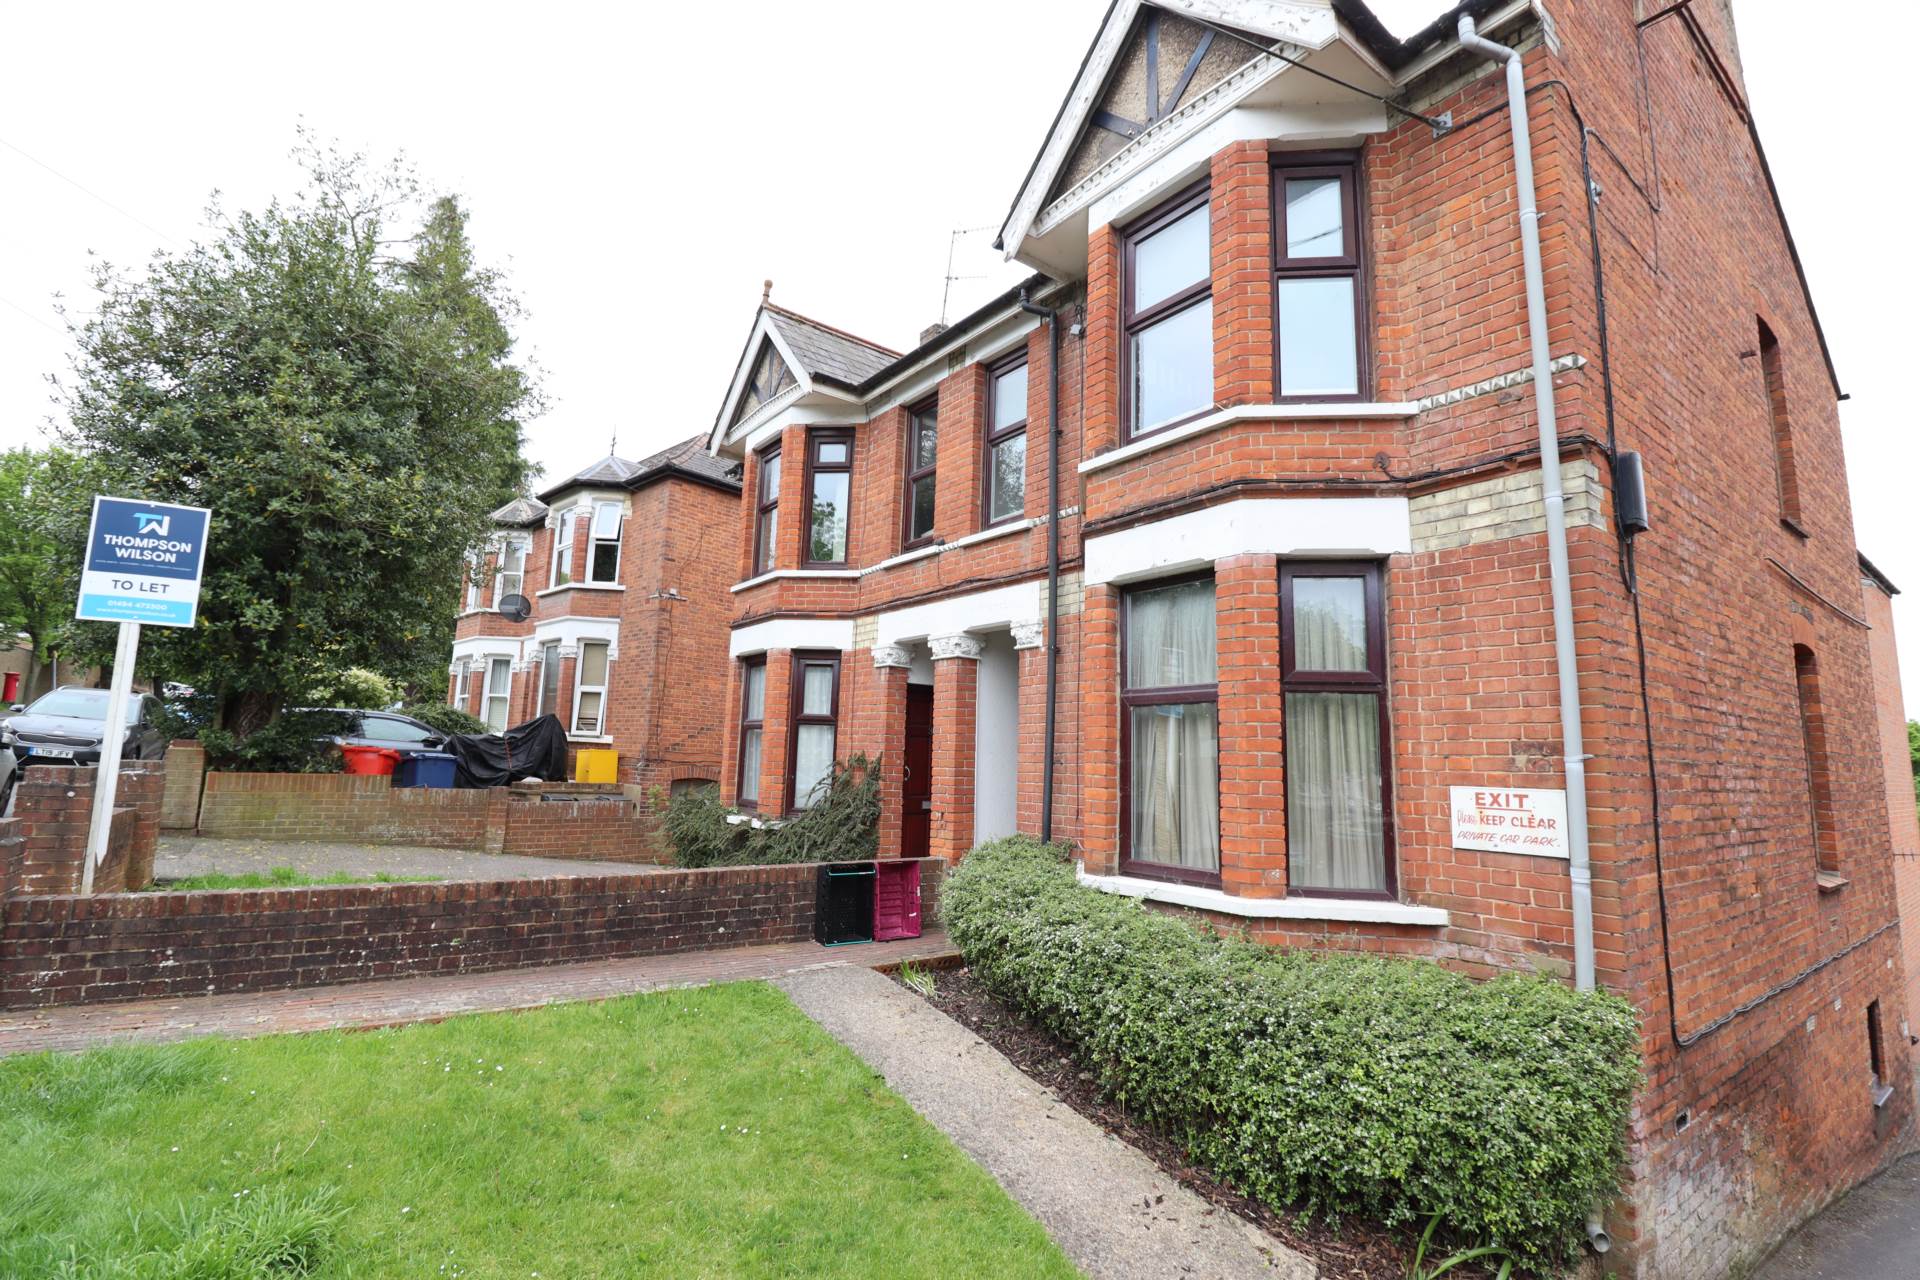 2 bed Flat for rent in High Wycombe. From Eden Sales & Lettings - High Wycombe